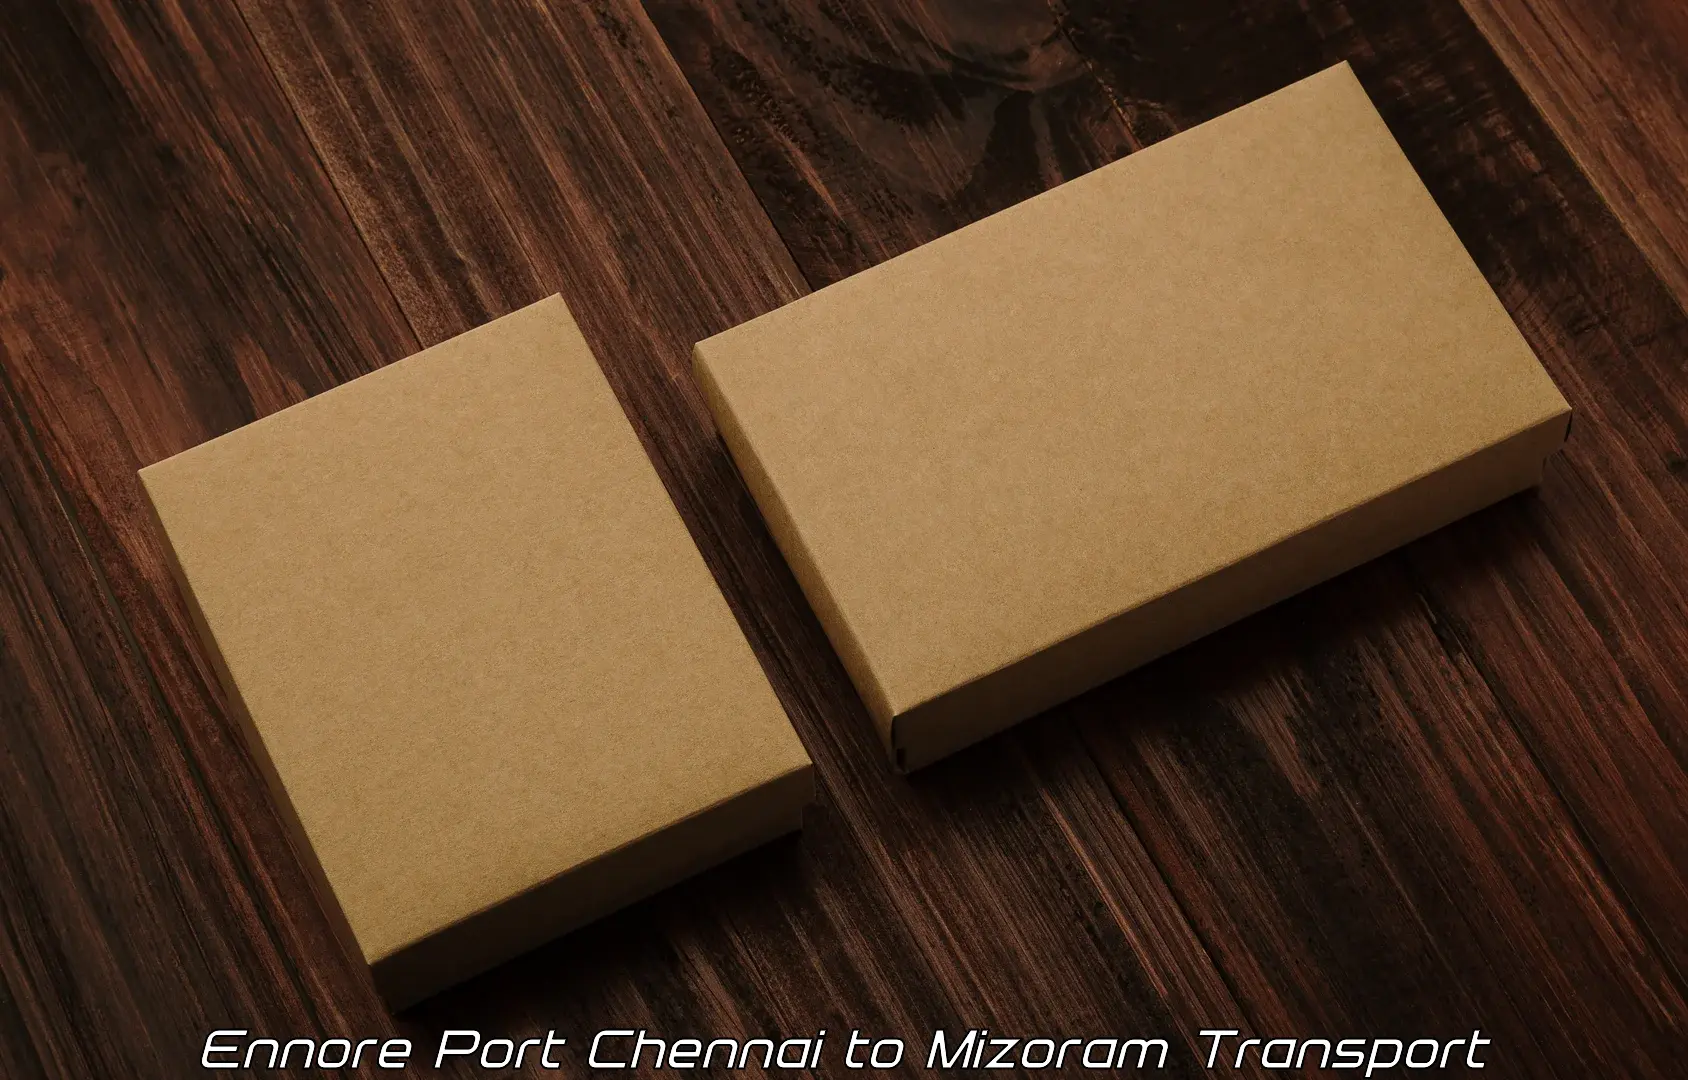 Nationwide transport services Ennore Port Chennai to Siaha